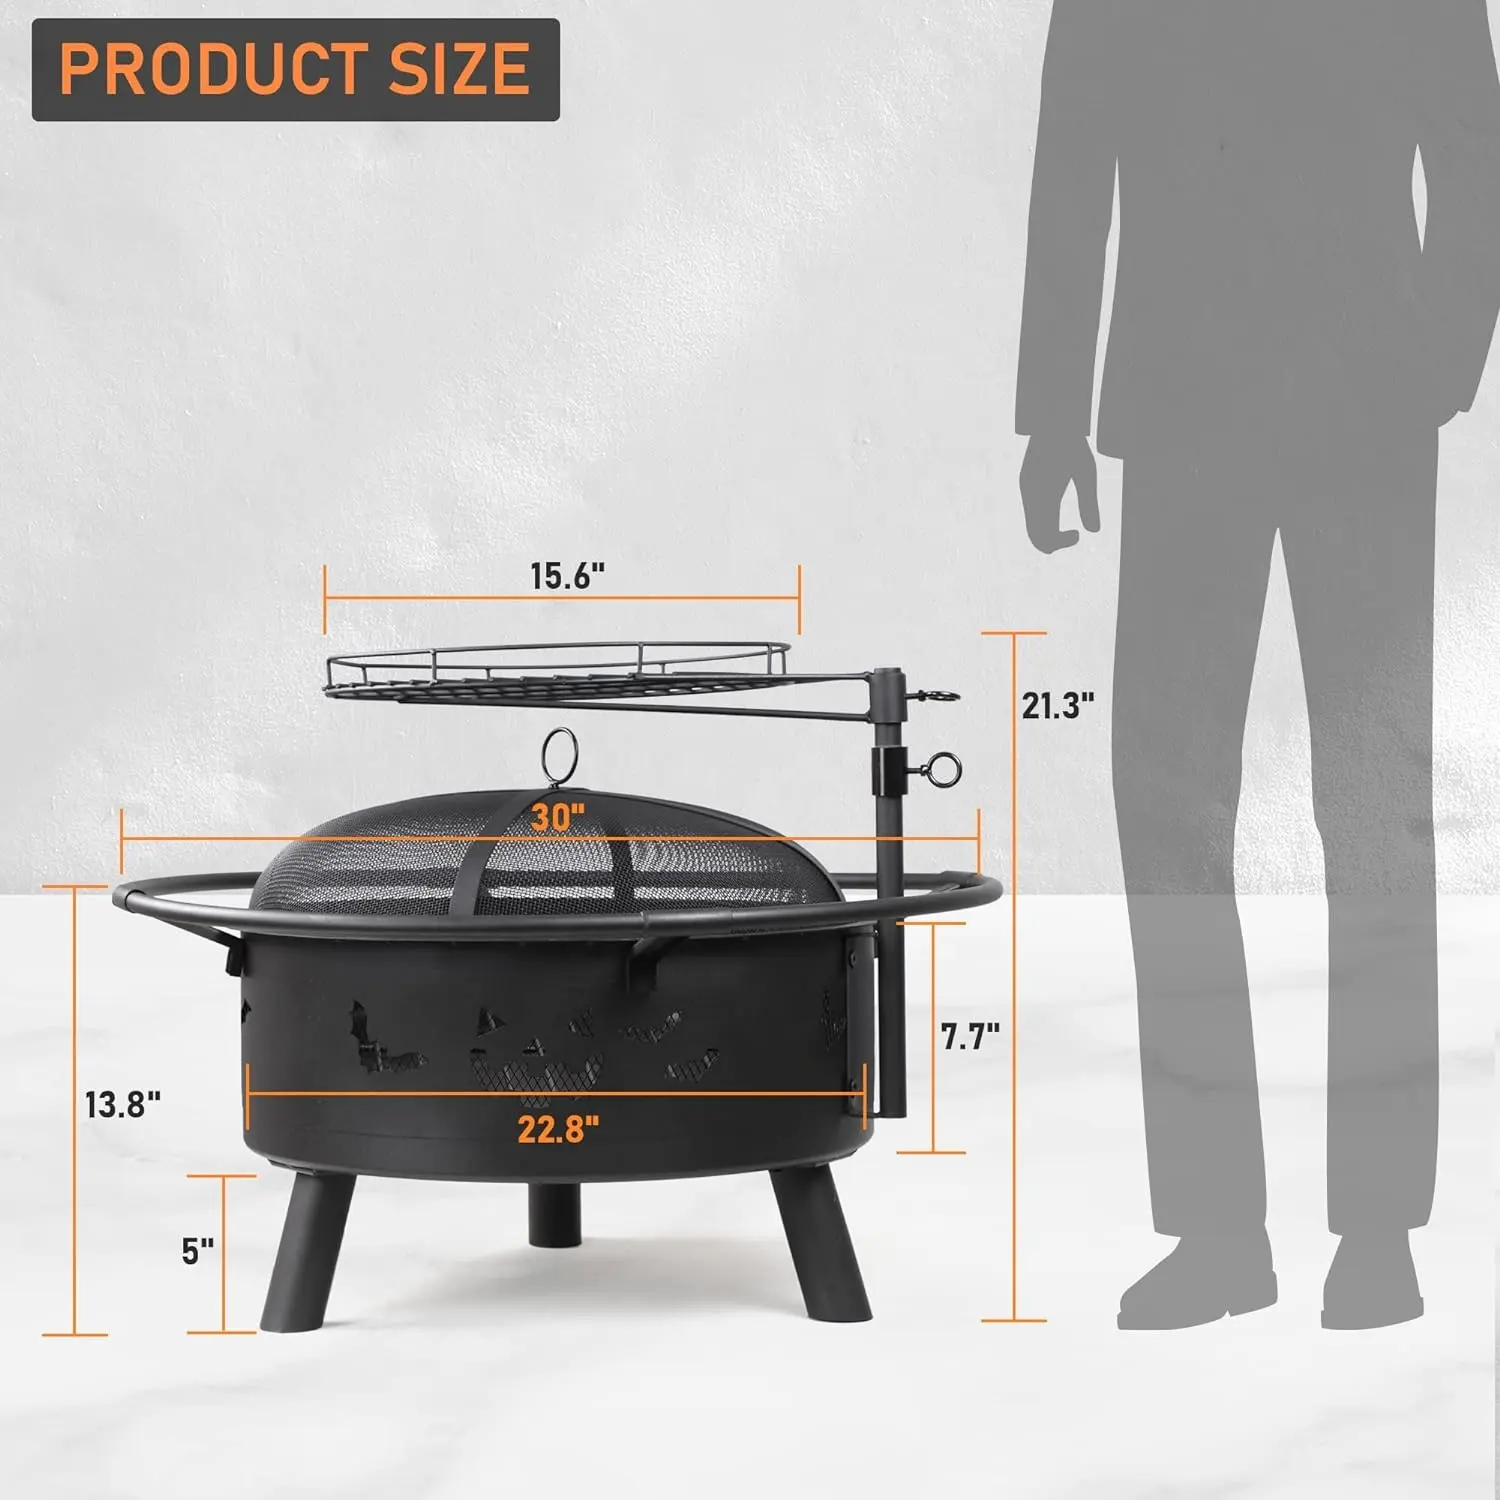 30 Inch Steel BBQ Fire Pit Outdoor Garden Cooking Wood Burning Fire Pit With Swivel BBQ Grill